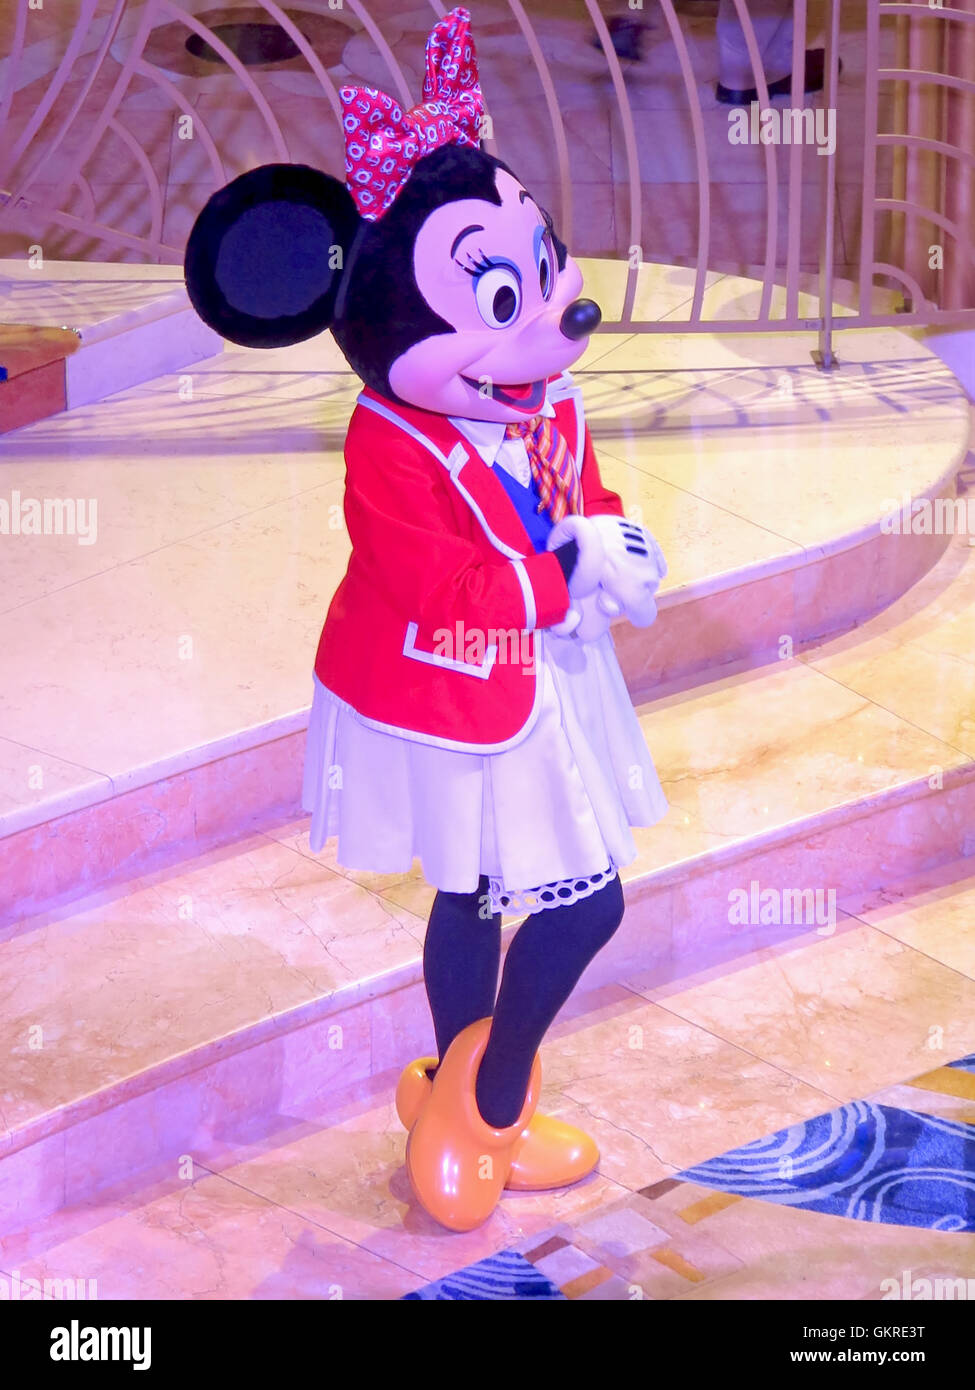 Nassau, Bahamas. January 30th, 2013. Minnie Mouse greeting guests in the lobby atrium on the Disney Dream Cruise Ship. Stock Photo